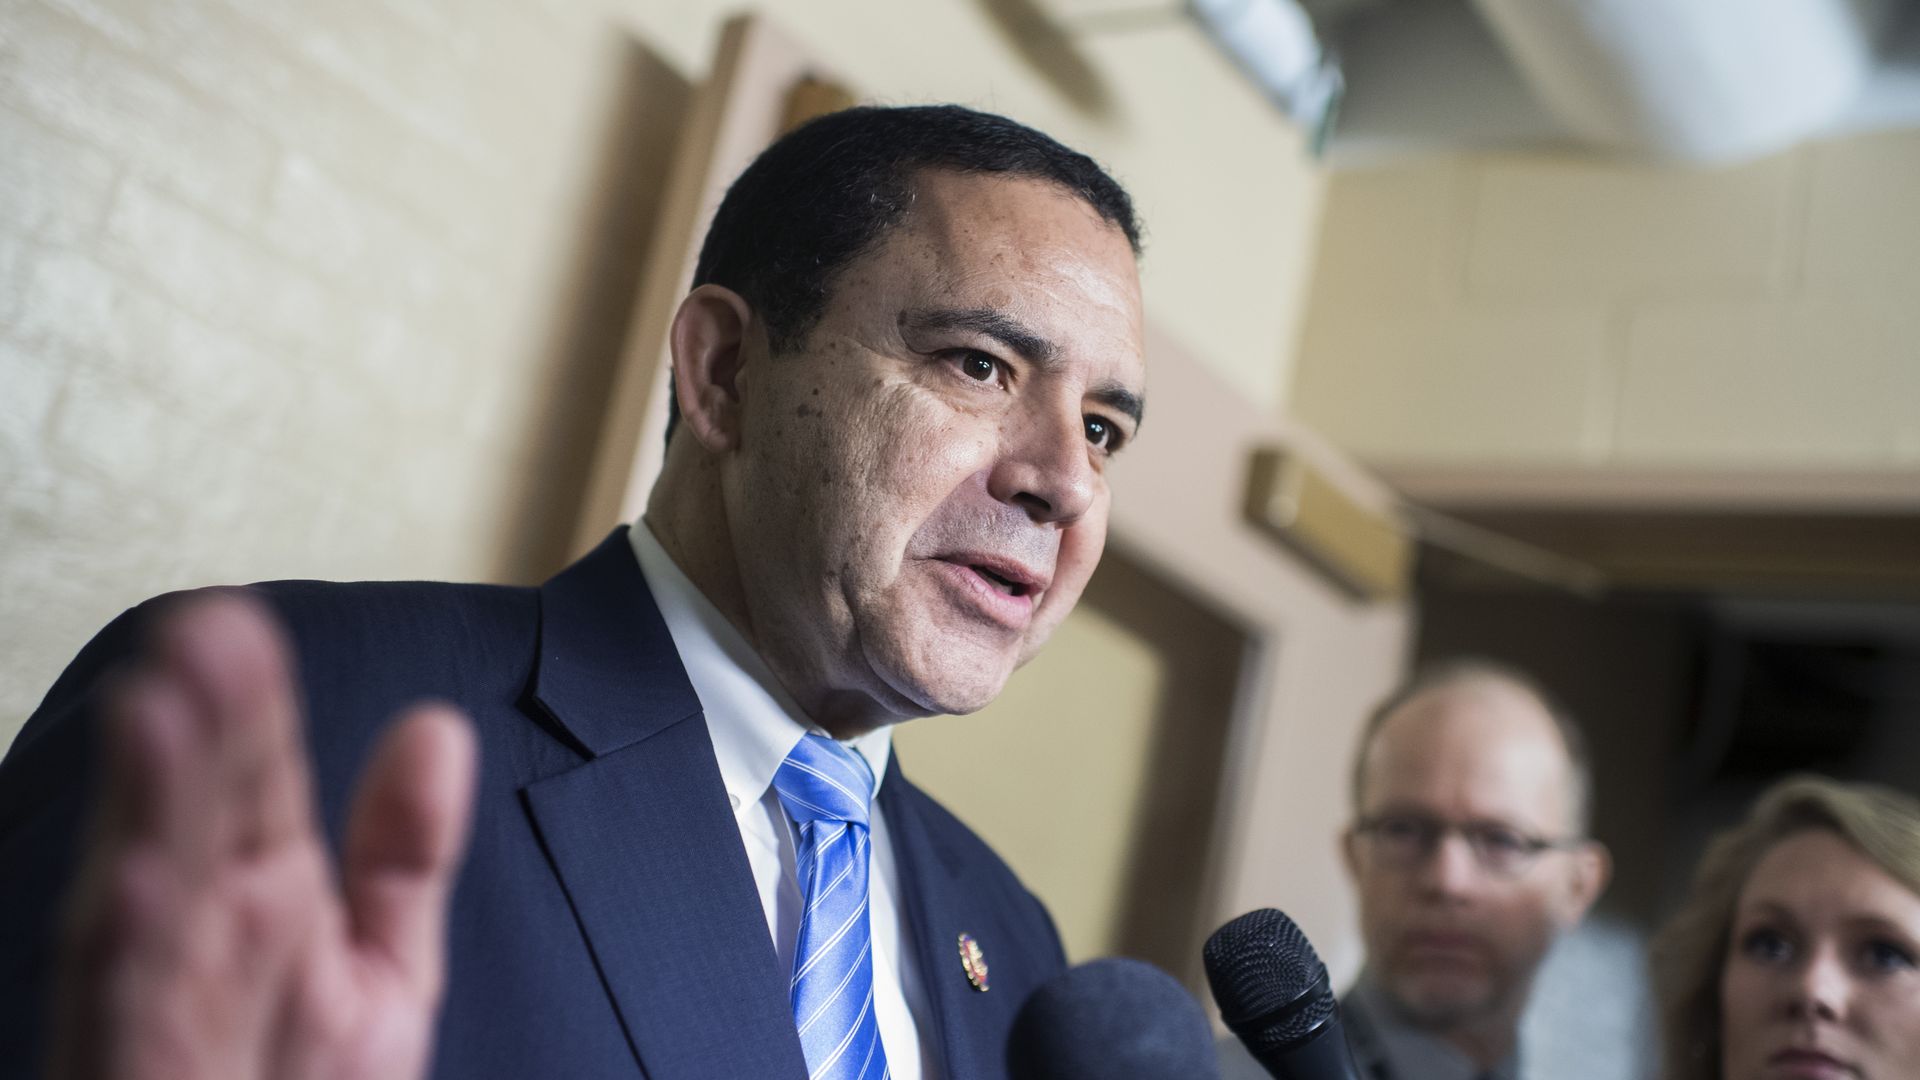 UNITED STATES - JUNE 27: Rep. Henry Cuellar, D-Texas, talks with reporters in the Capitol after a meeting of House Democrats on Thursday, June 27, 2019.